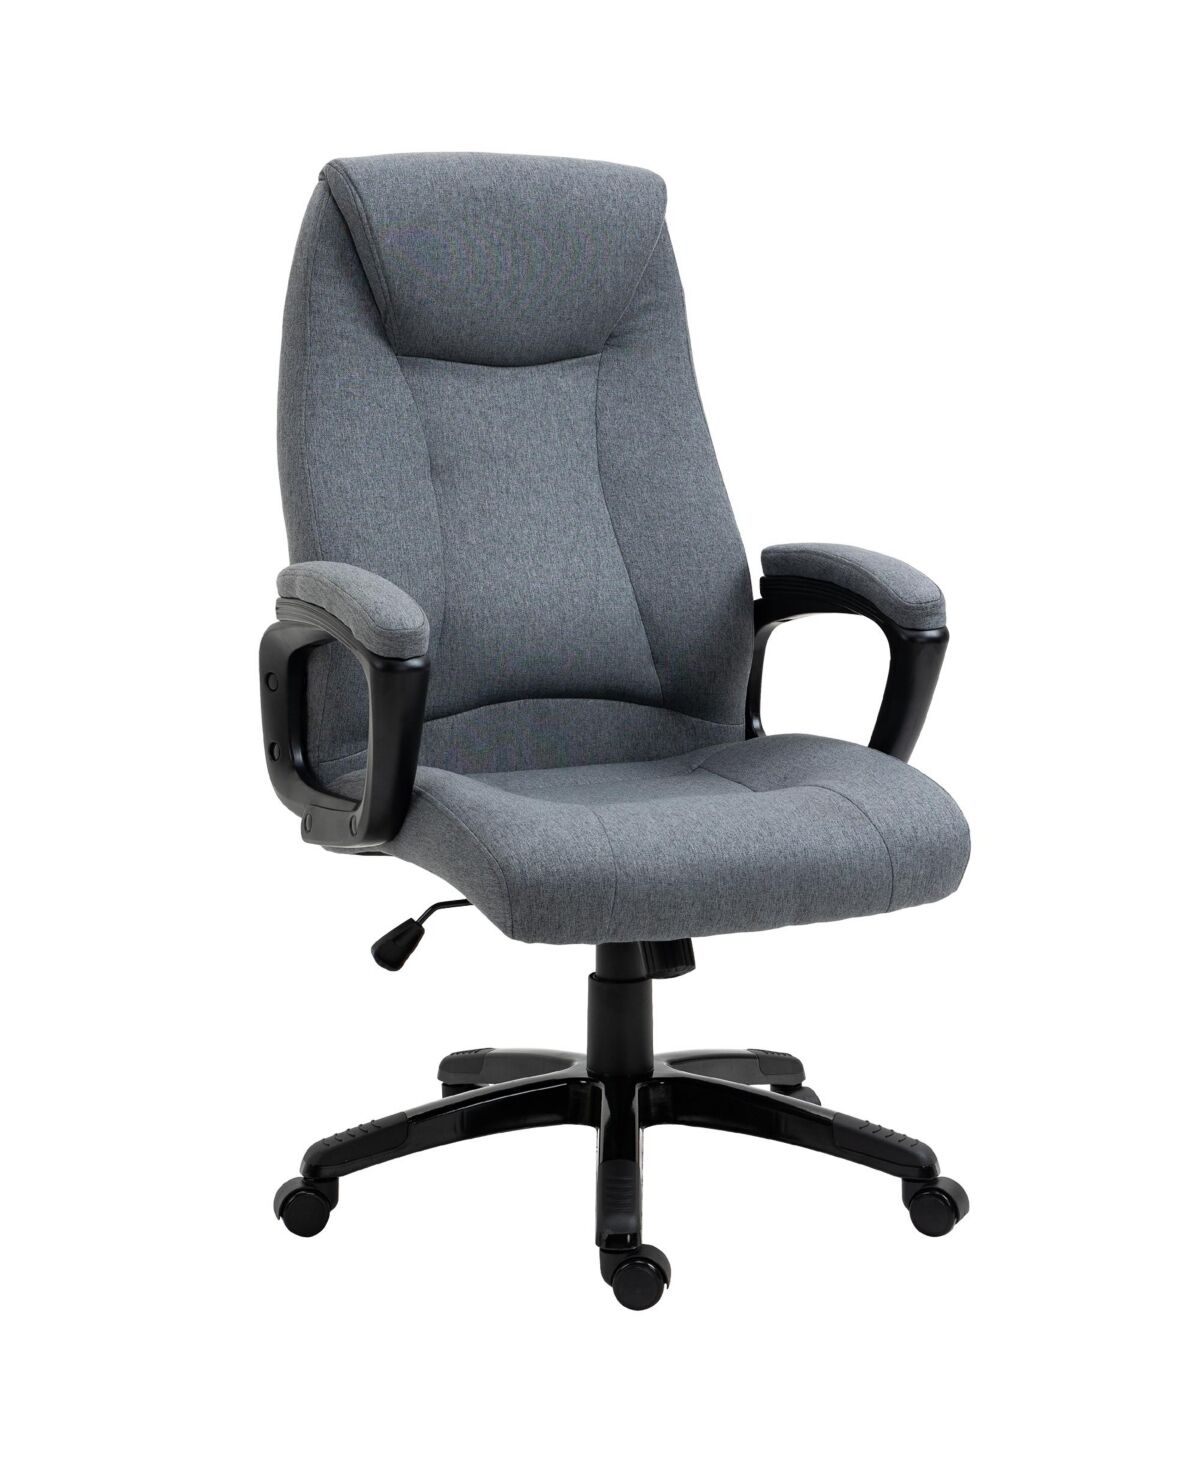 Vinsetto Fabric Home Office Chair, Computer Desk Chair with Tilt Function, Executive Chair with 360° Swivel, Adjustable Height, Padded Armrests and He